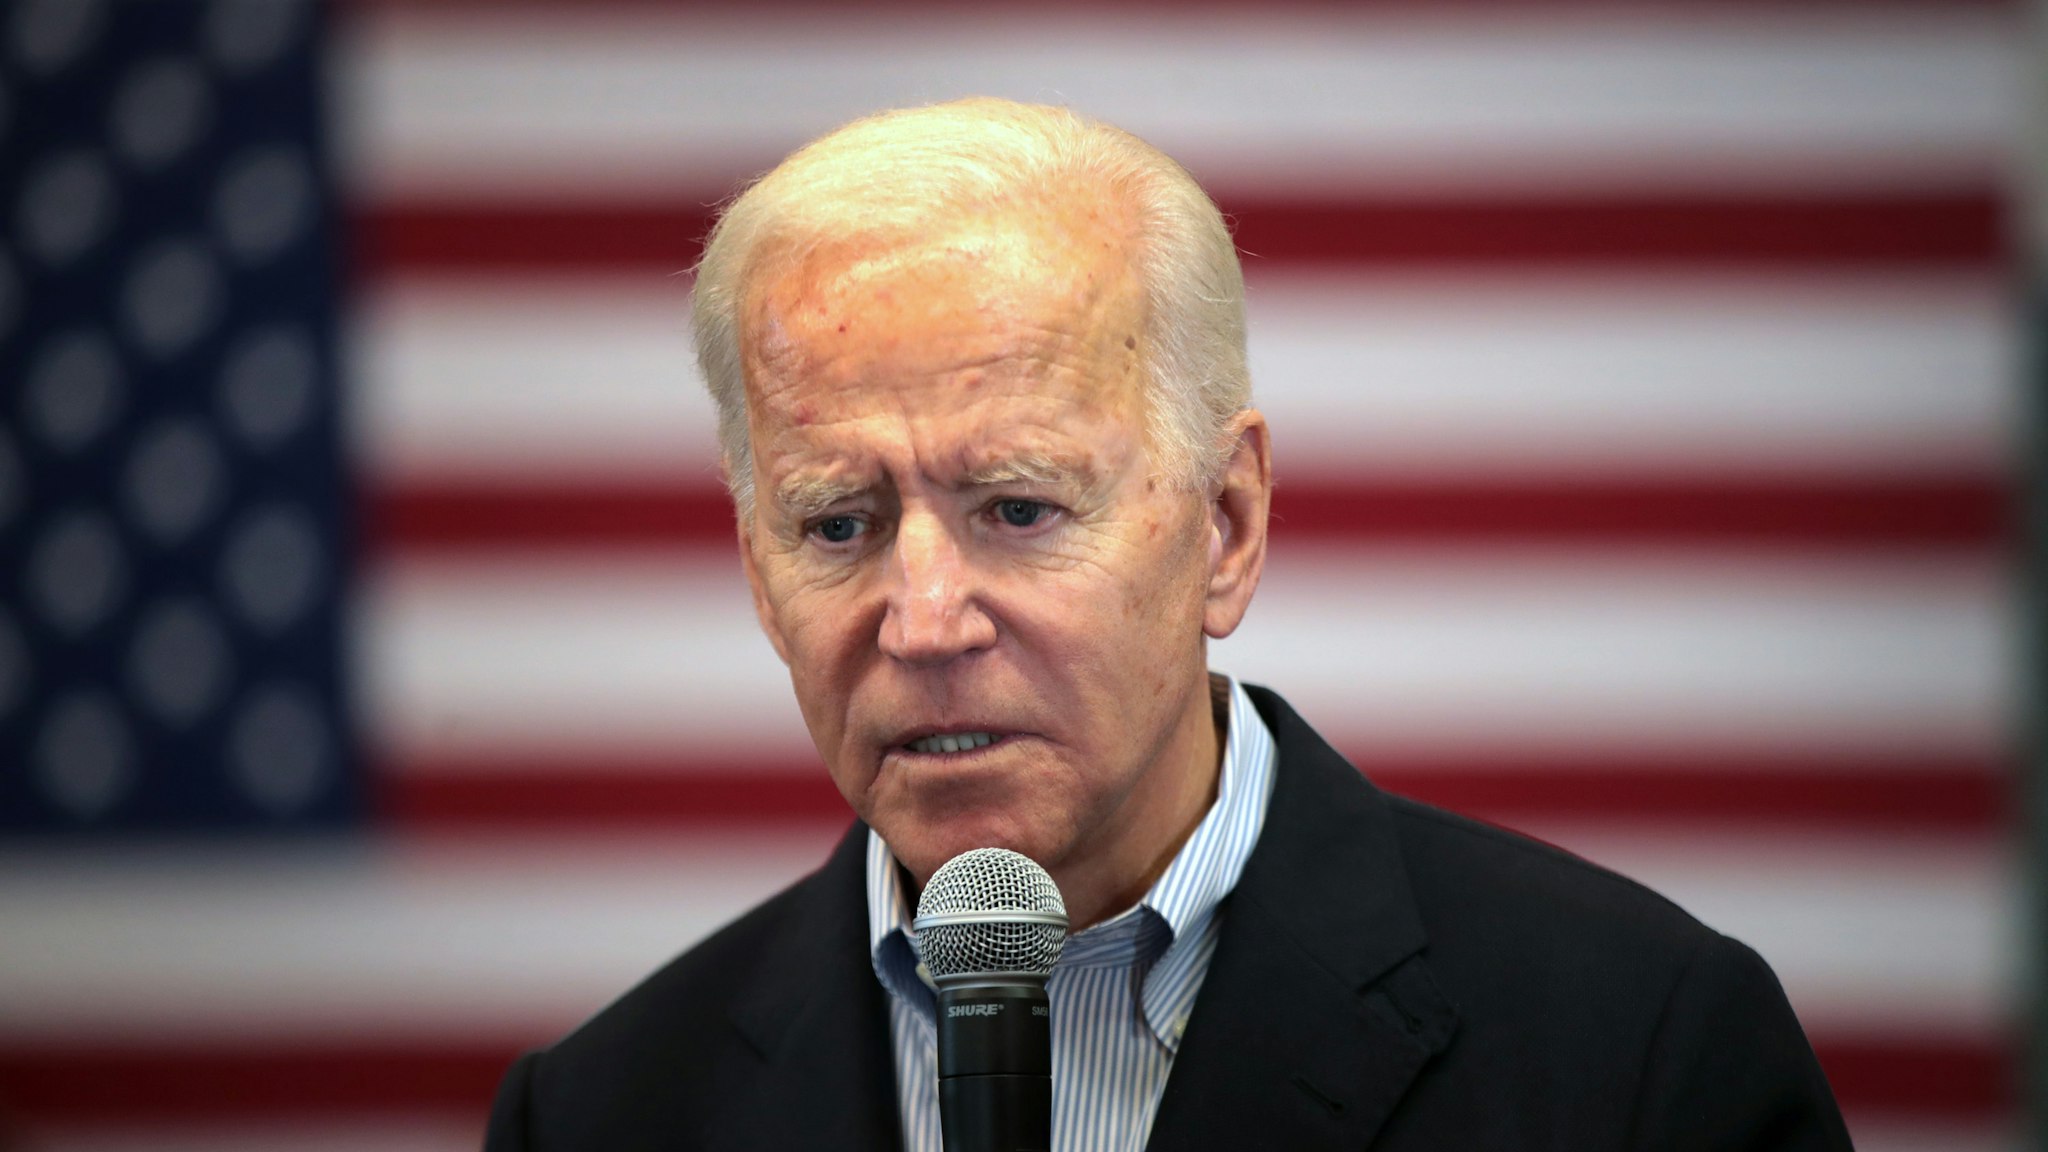 ALGONA, IOWA - DECEMBER 02: Democratic presidential candidate, former Vice President Joe Biden speaks during a campaign stop at the Water's Edge Nature Center on December 2, 2019 in Algona, Iowa. The stop was part of Biden's 650-mile "No Malarkey" campaign bus trip through rural Iowa. The 2020 Iowa Democratic caucuses will take place on February 3, 2020, making it the first nominating contest for the Democratic Party in choosing their presidential candidate to face Donald Trump in the 2020 election. (Photo by Scott Olson/Getty Images)